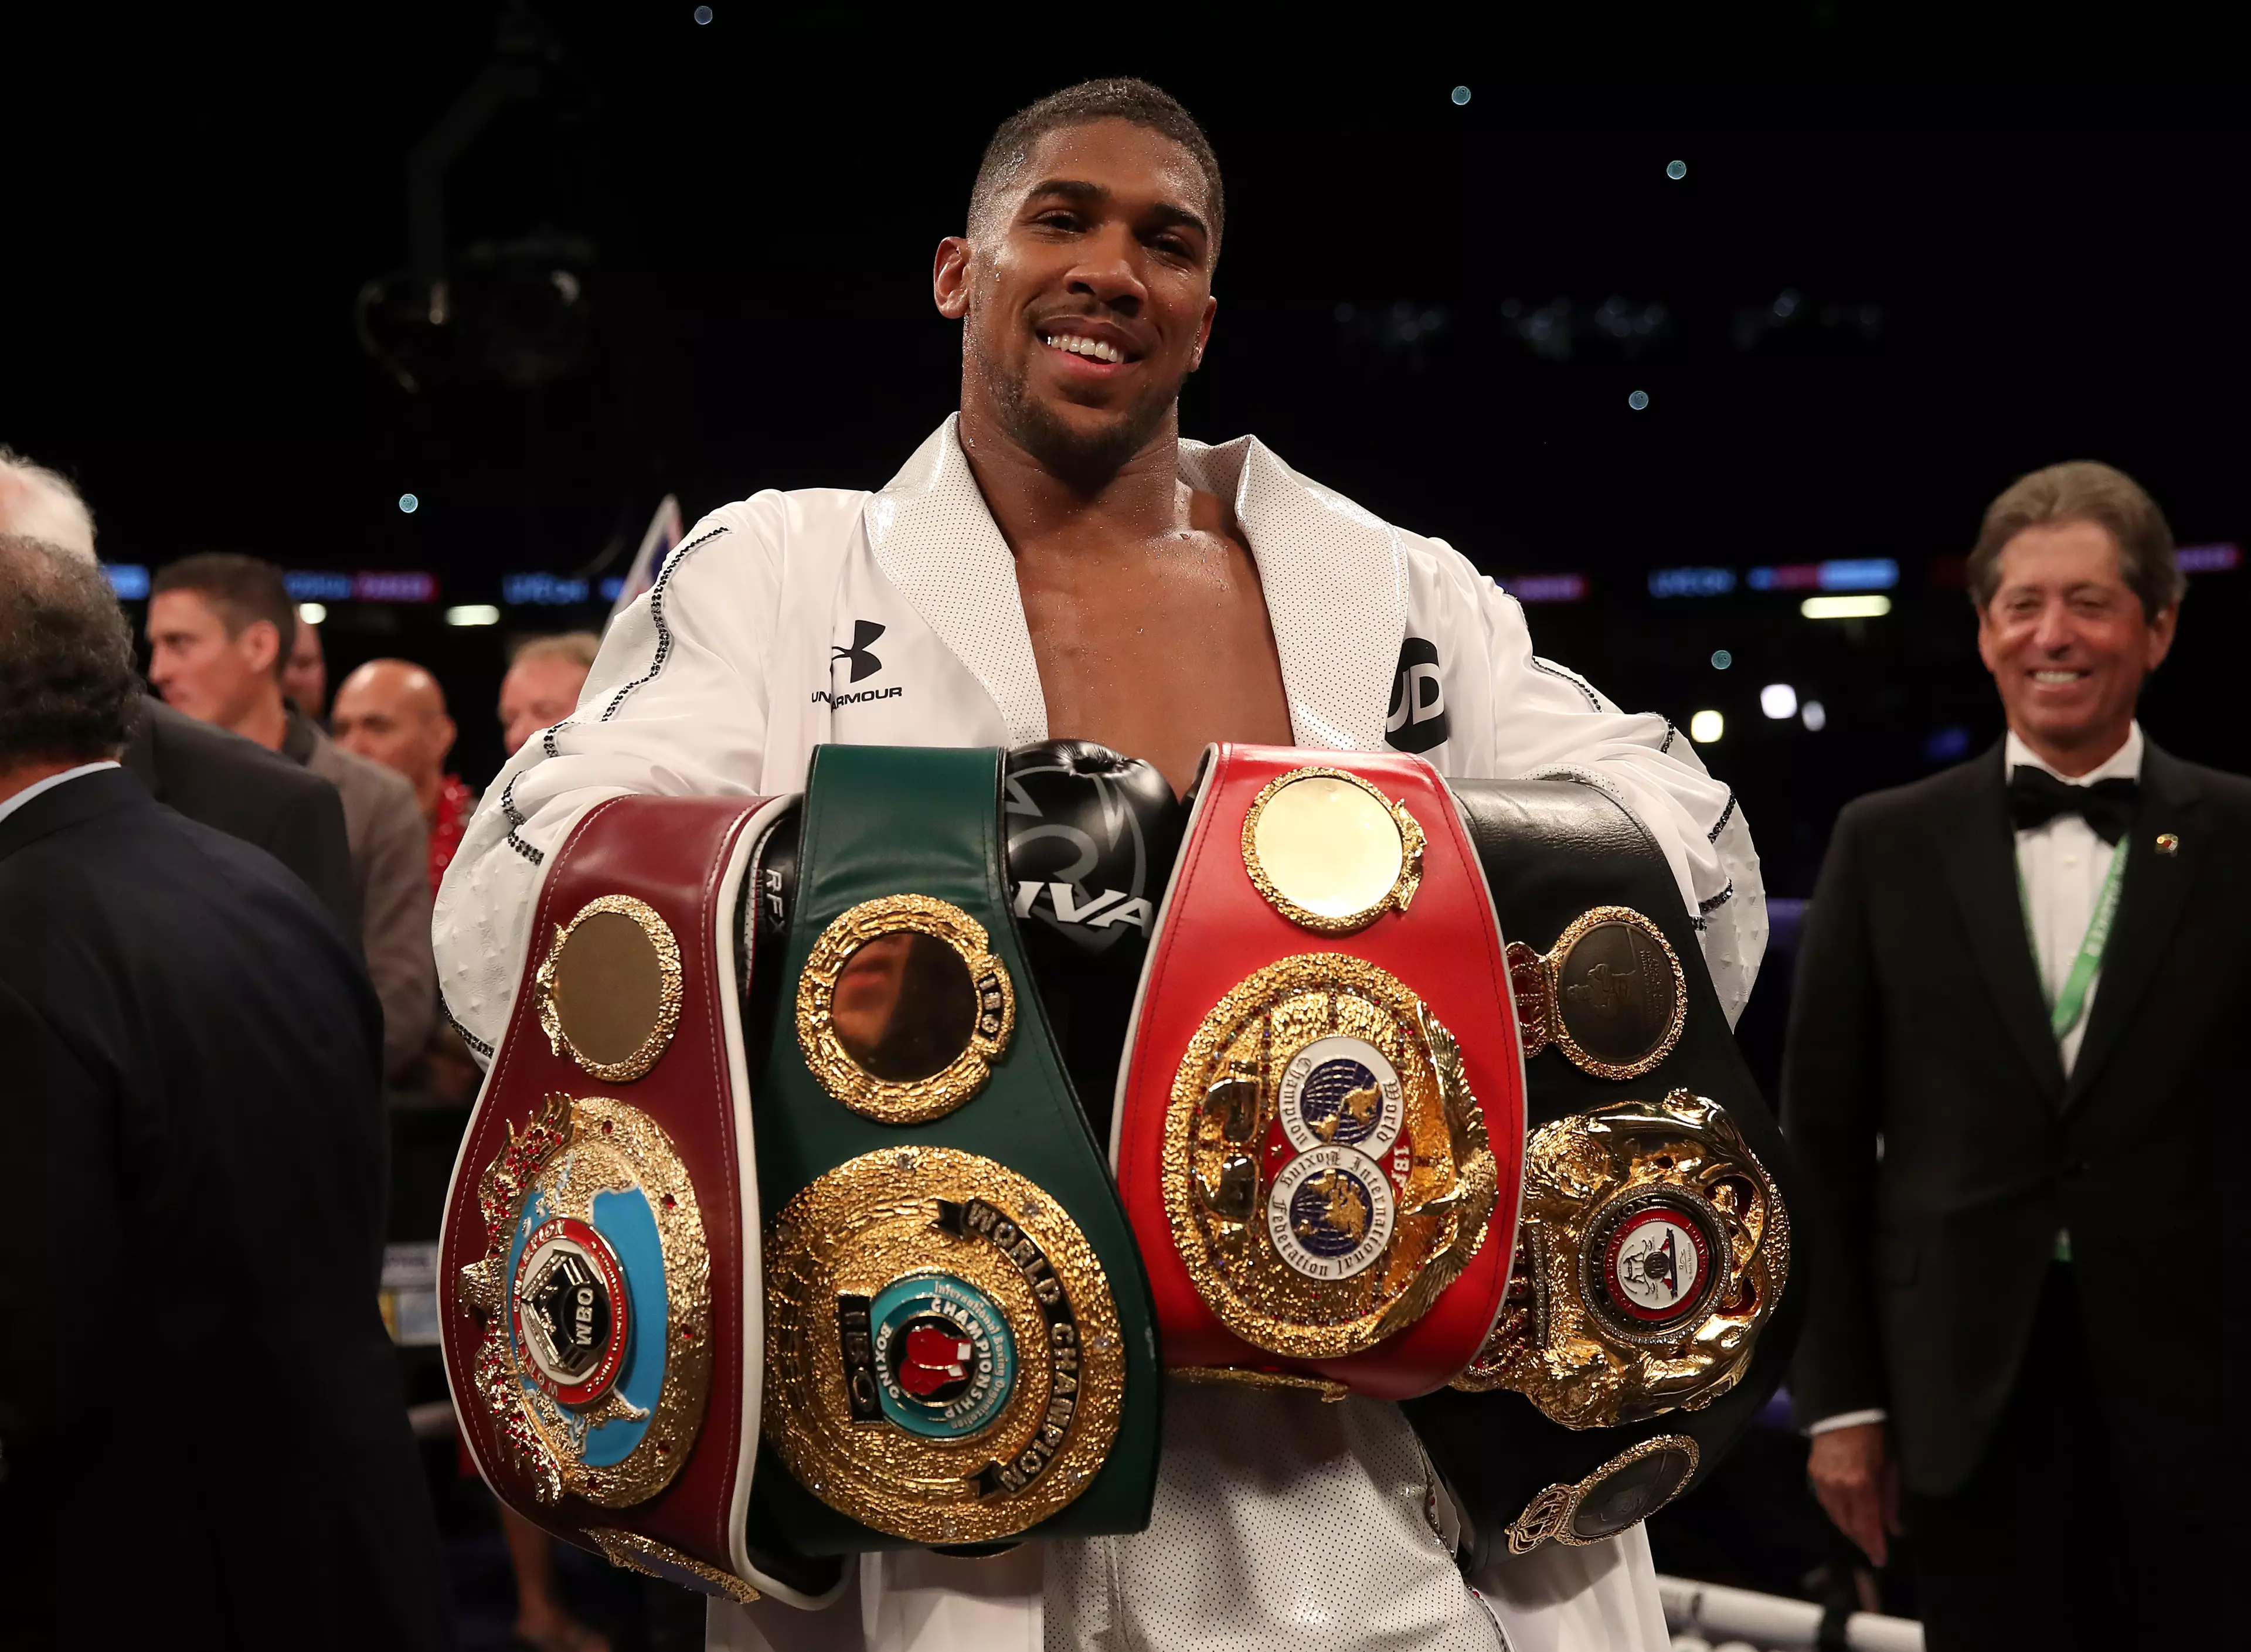 Joshua with his world titles. Image: PA